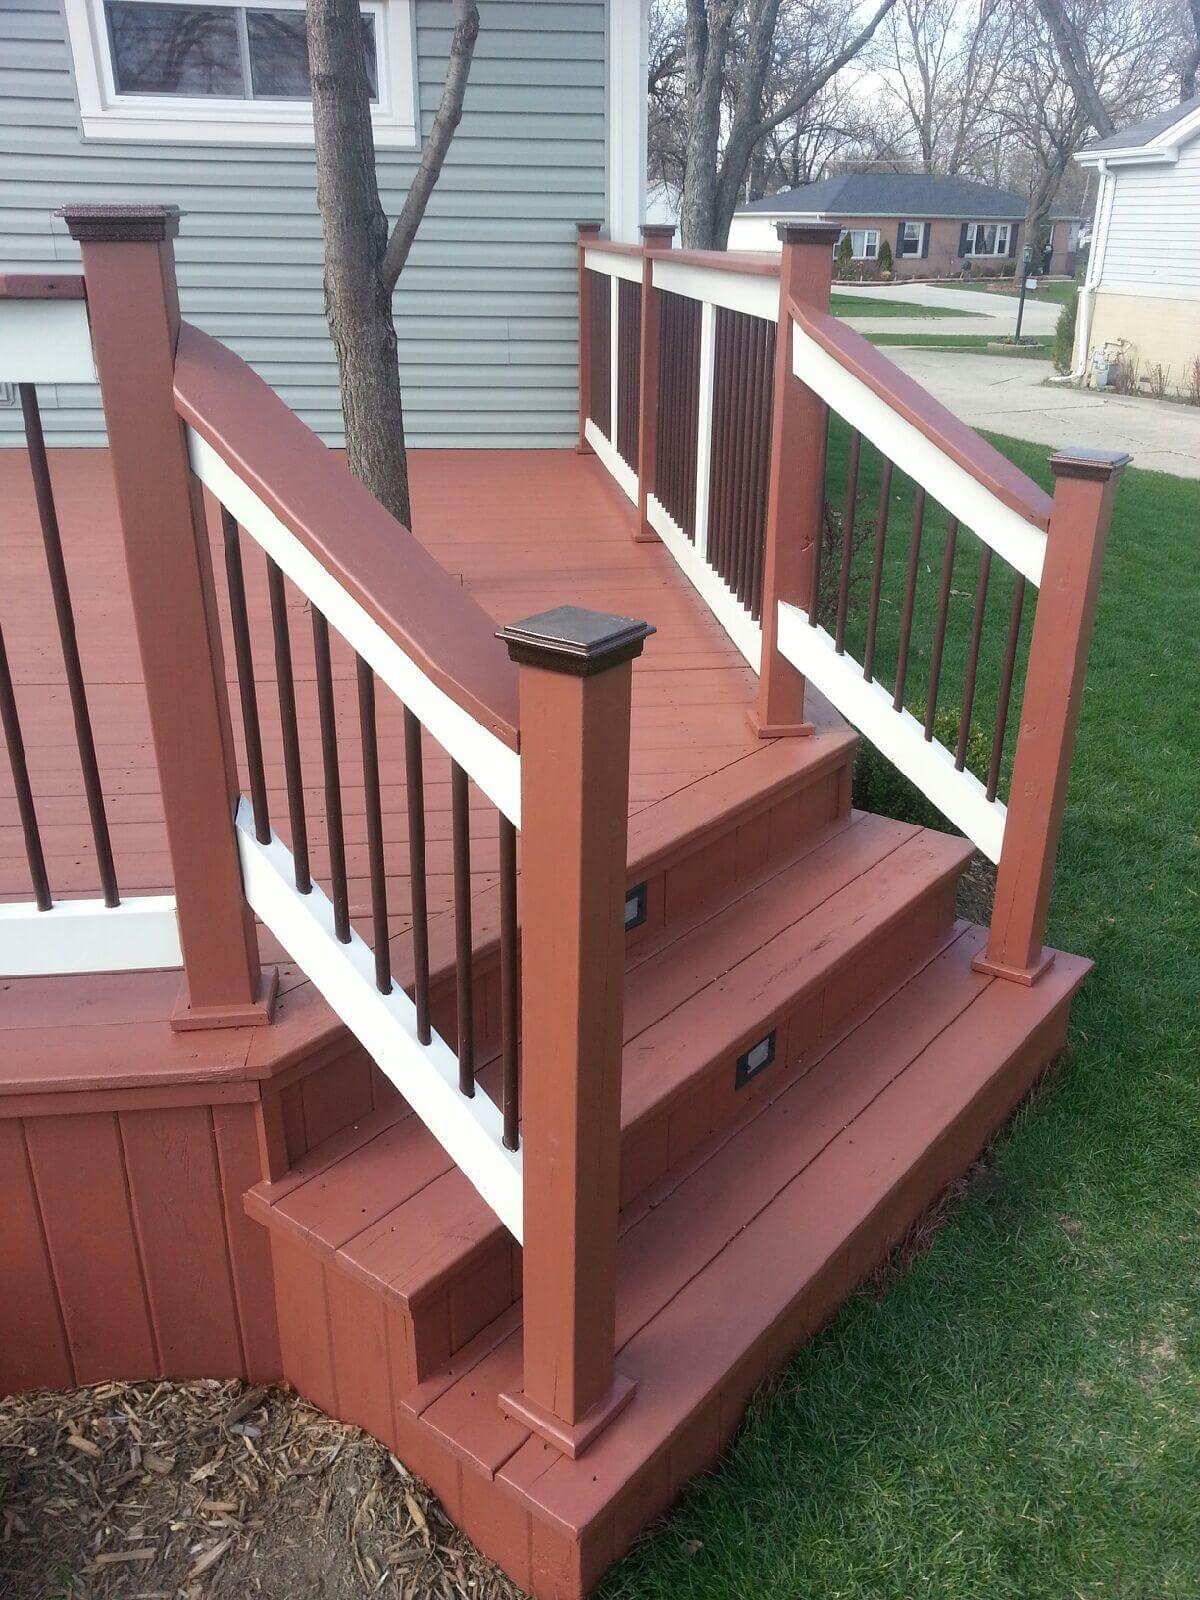 Repairs and maintenance for your deck, fence, and exterior wood staining. - Deck Staining Carol Stream - Deck Cleaning Services